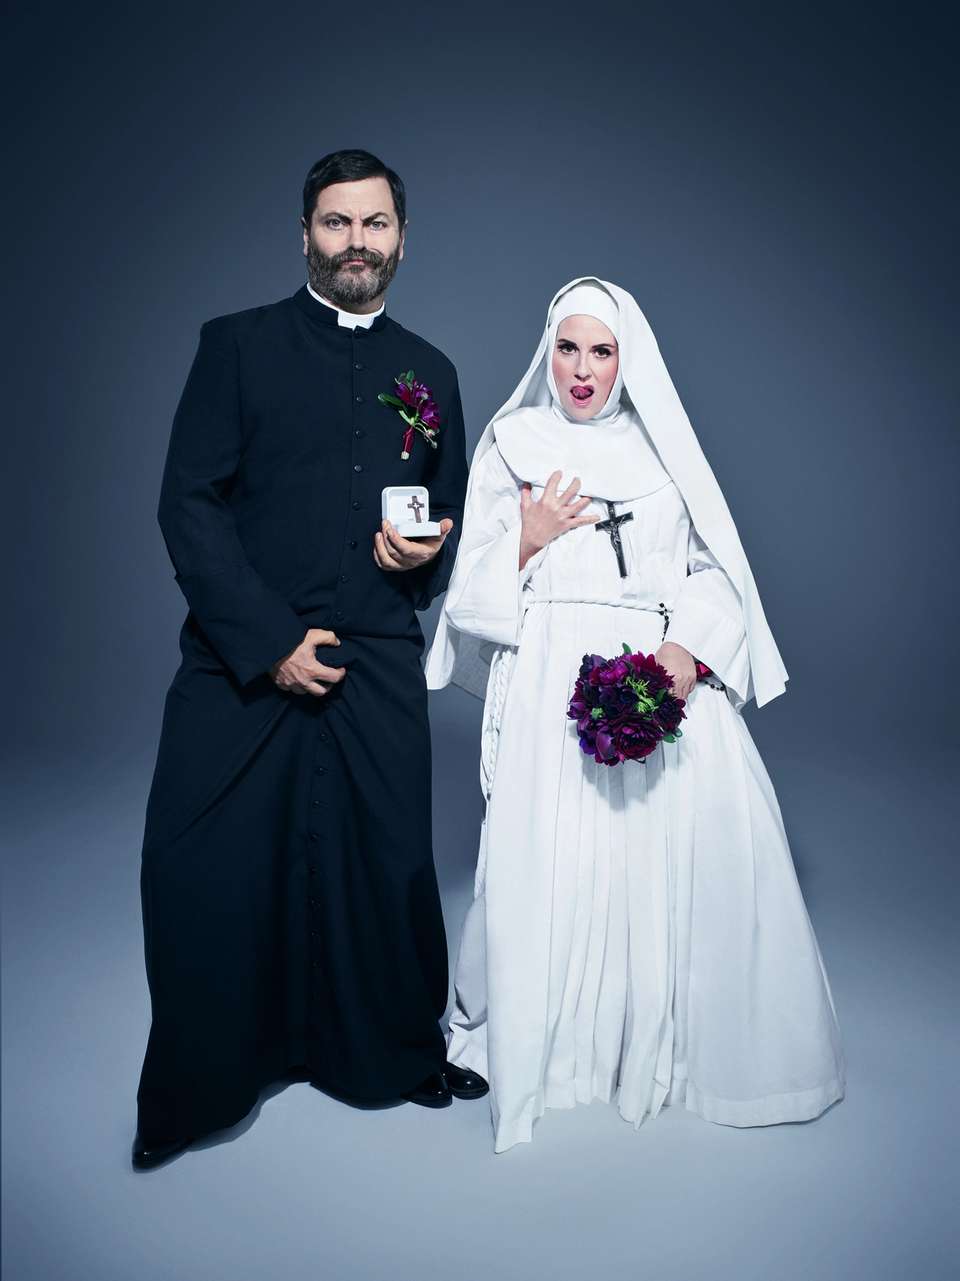 Nick & Megan dressed up as a catholic priest and nun respectively. Both clutching their private parts.